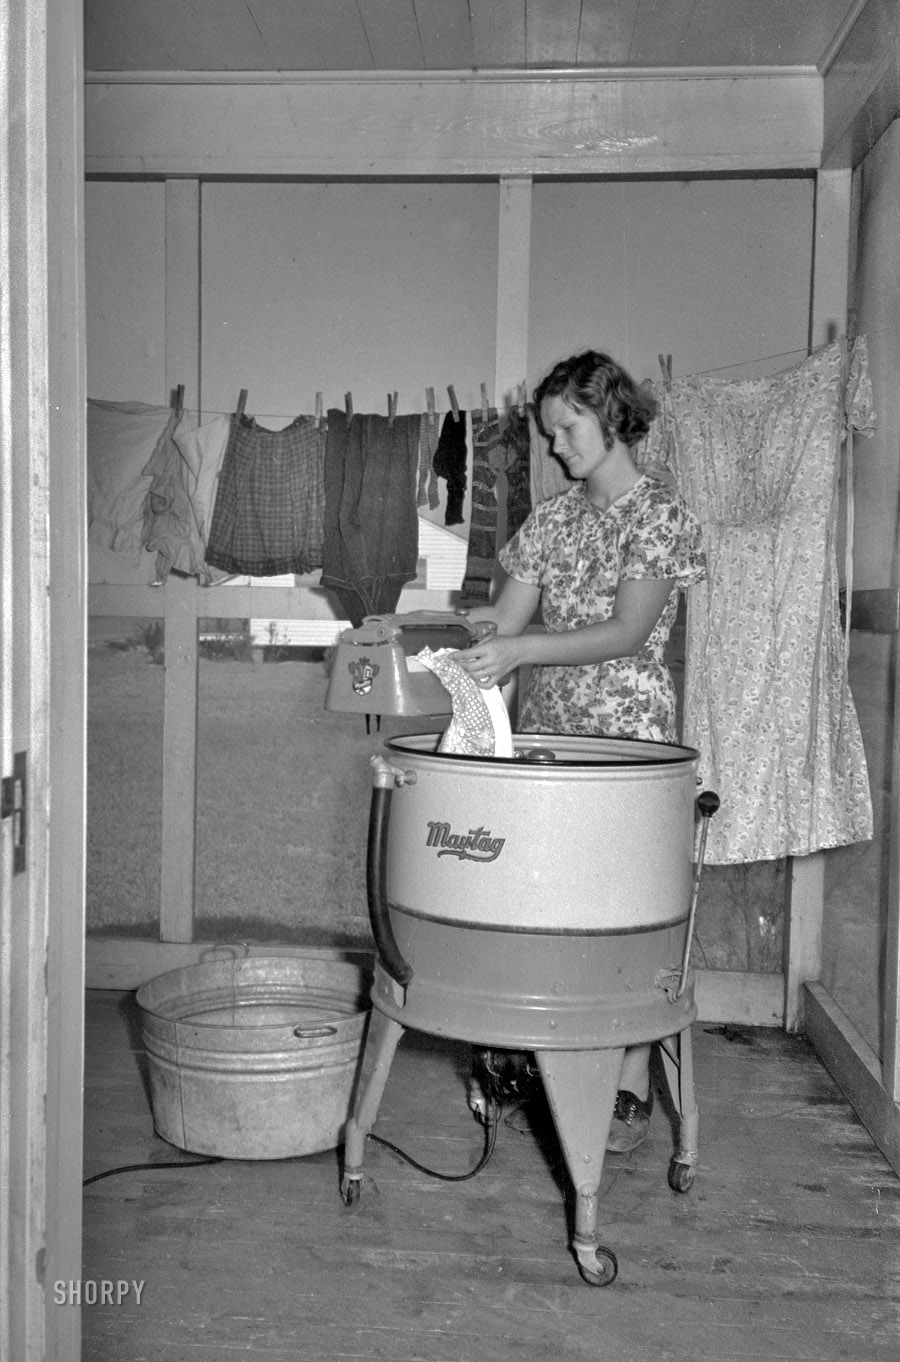 September 1938. "Farm wife washing clothes. Lake Dick Project, Arkansas." 35mm negative by Russell Lee, Farm Security Administration. View full size.